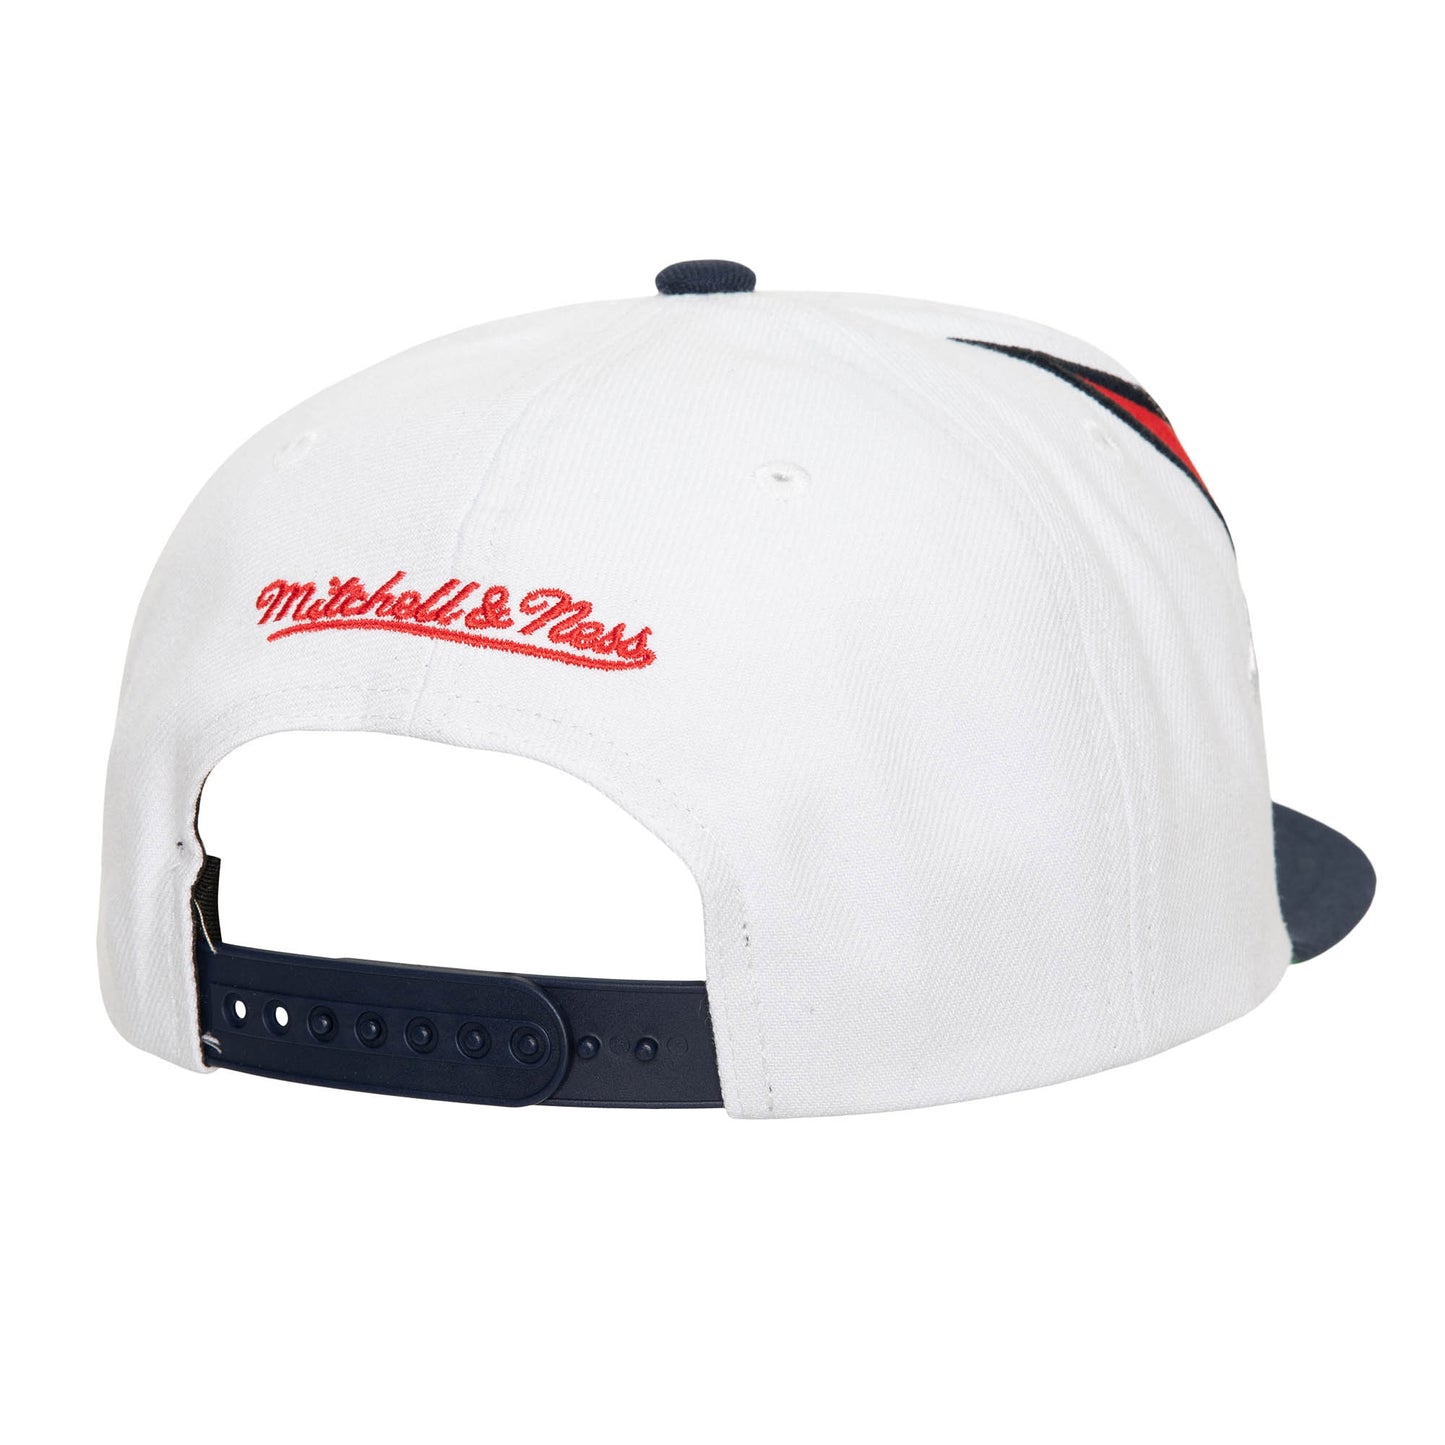 Boston Red Sox Mitchell & Ness Wave Runner Snapback Hat